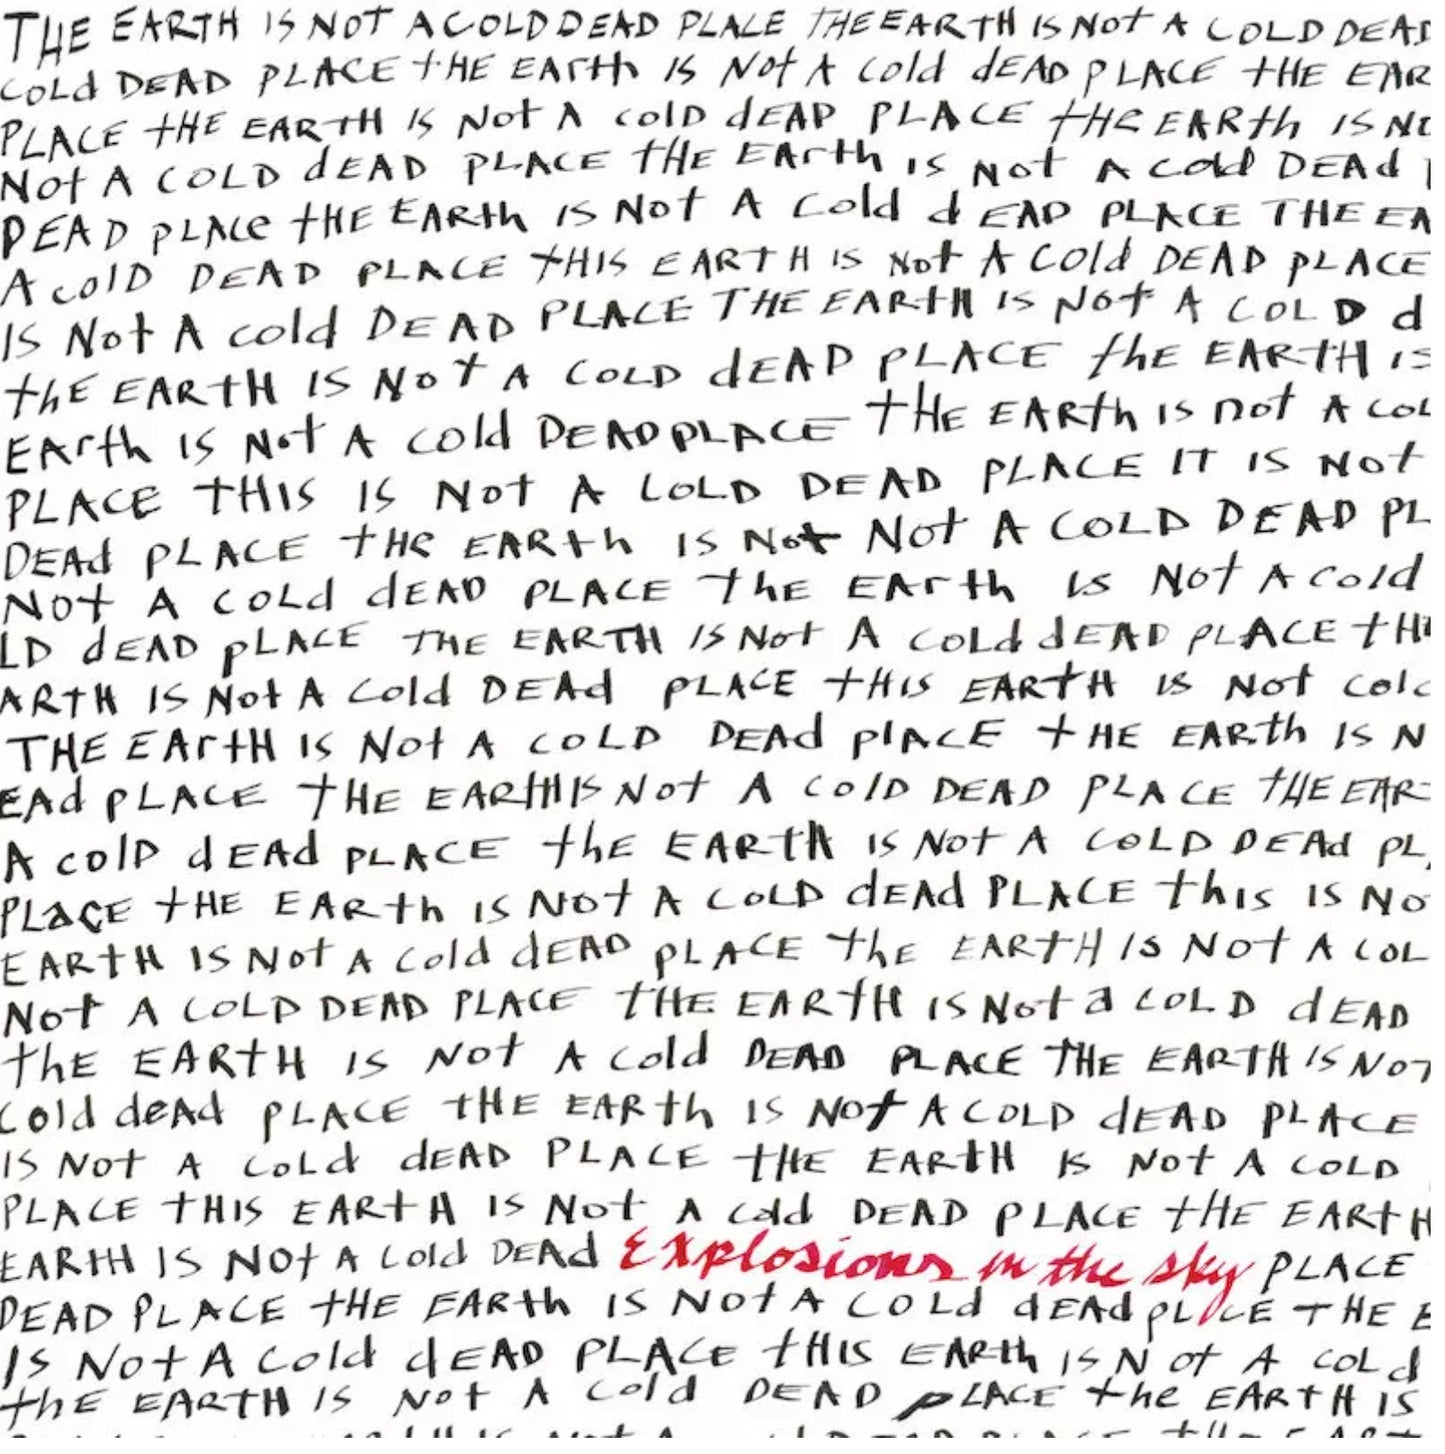 Explosions in the Sky - The Earth Is Not a Cold Dead Place 